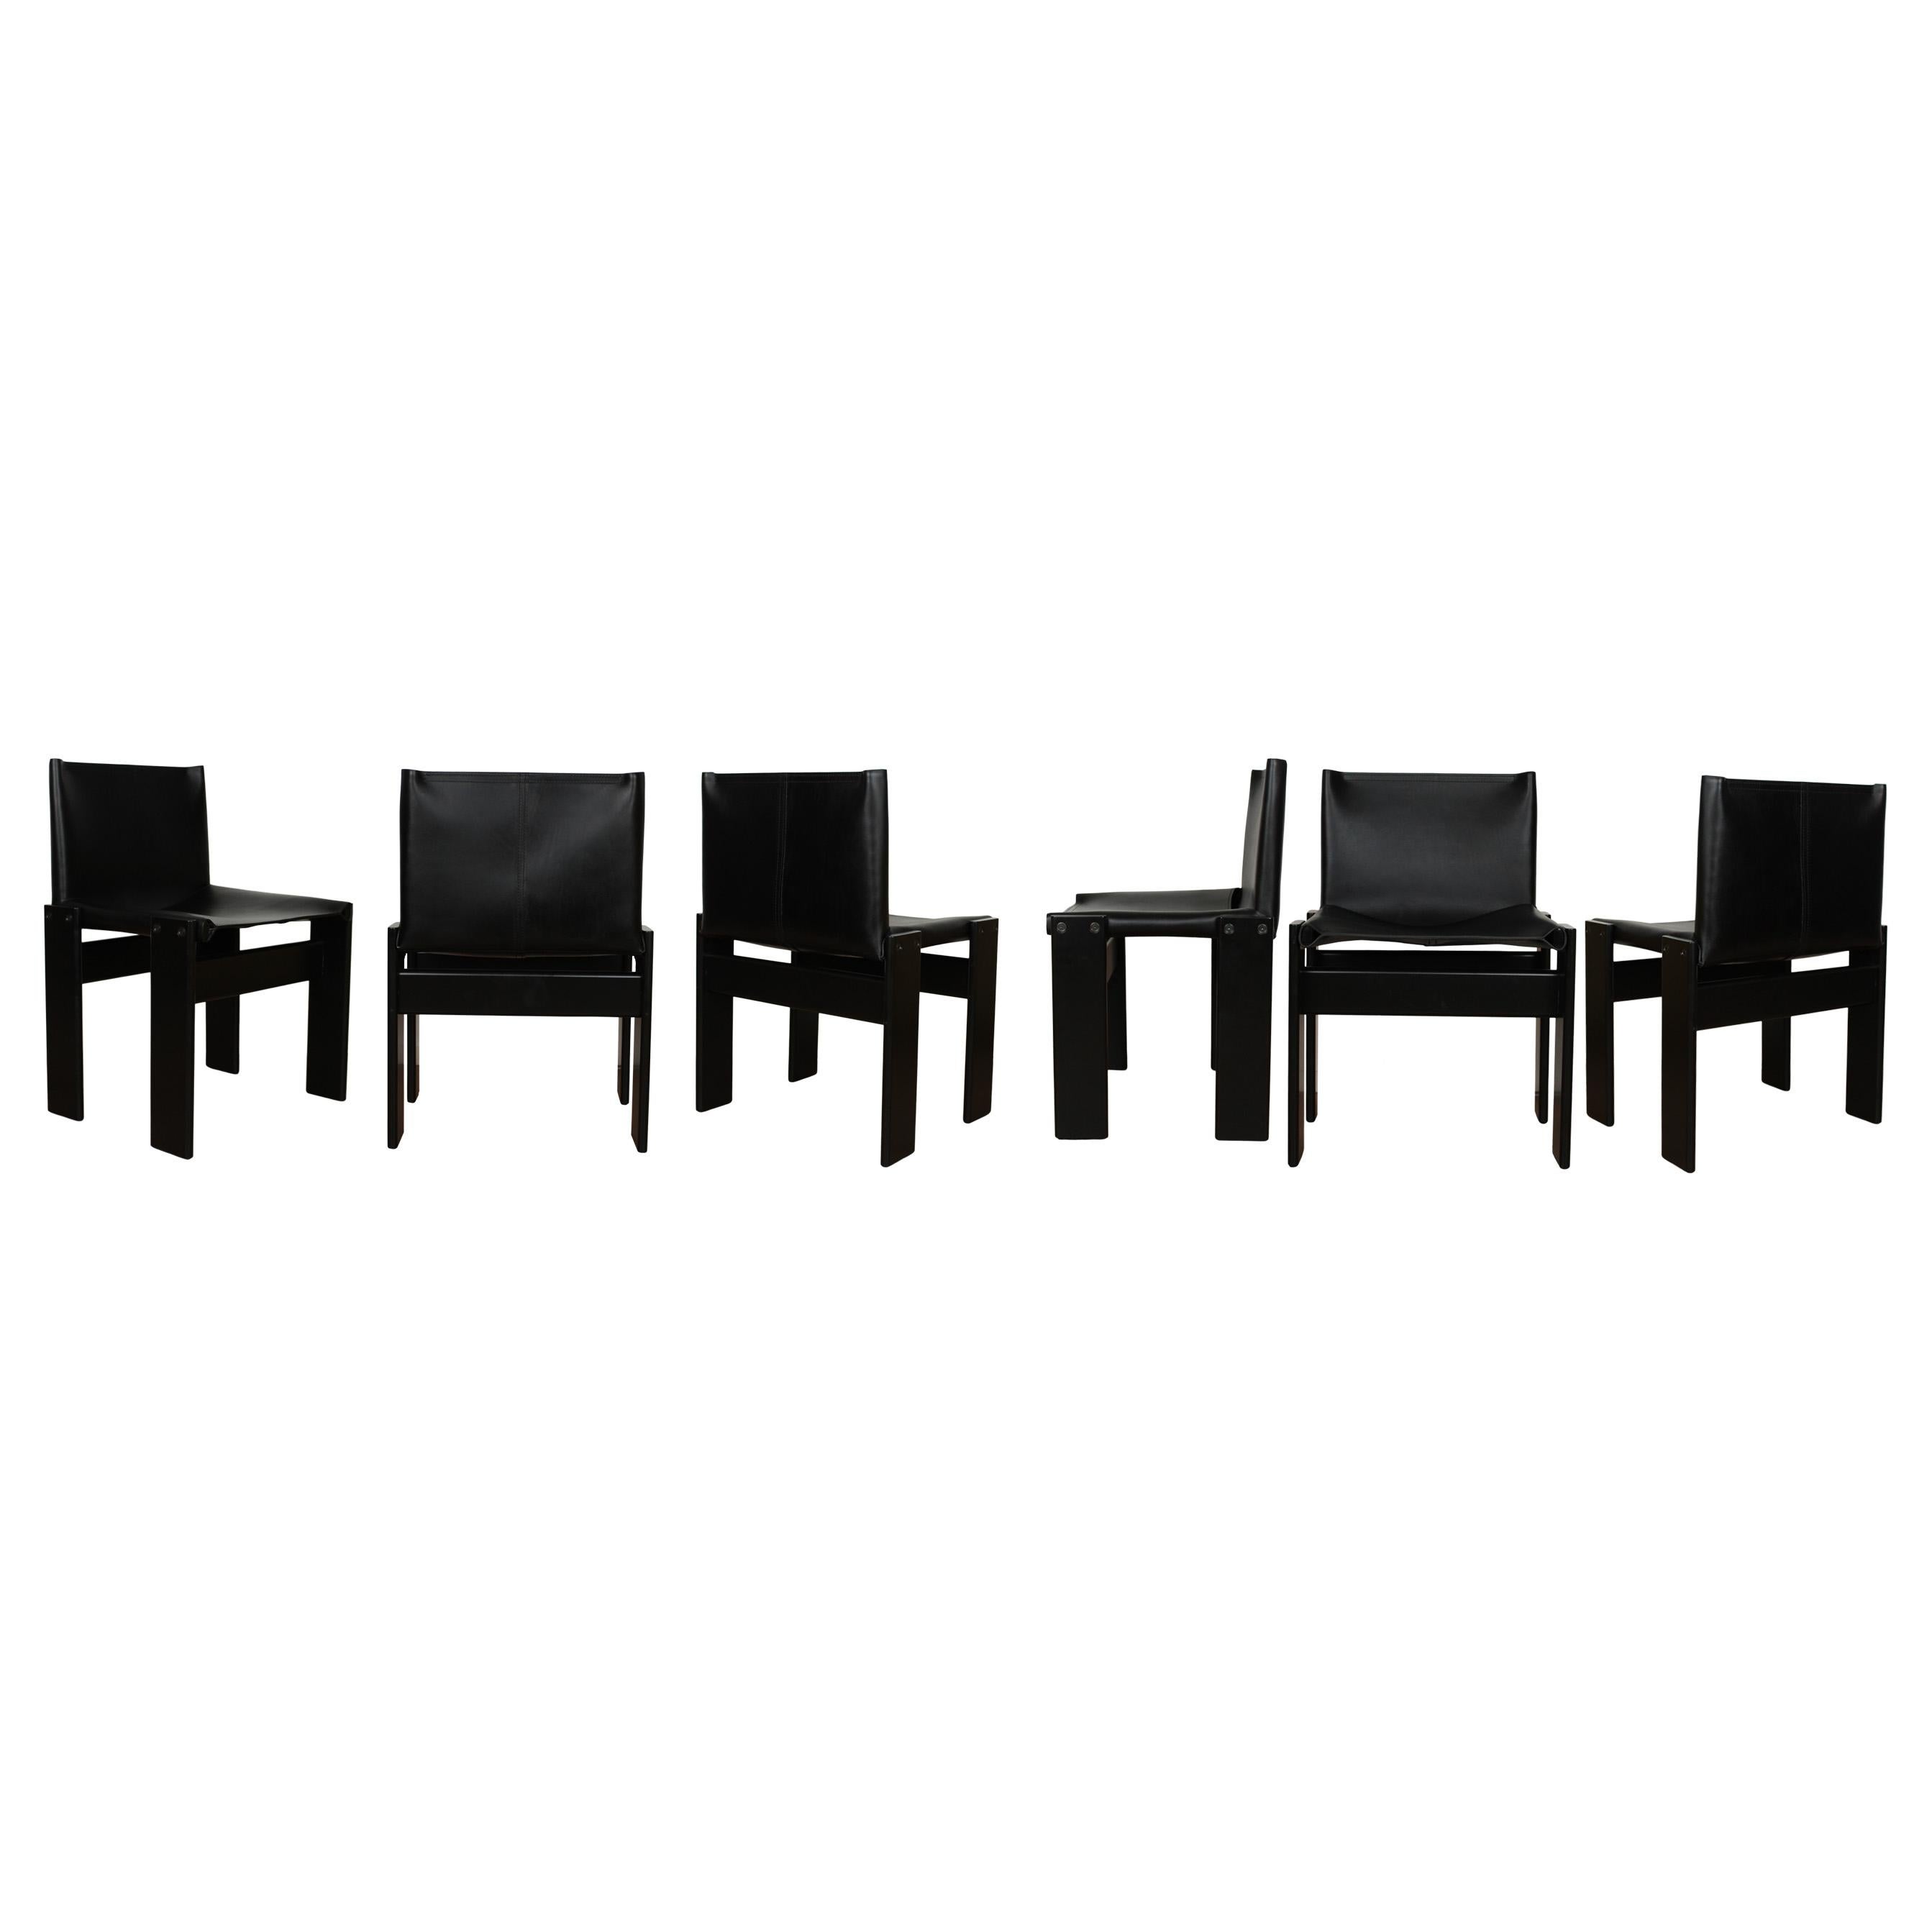 Italian Afra & Tobia Scarpa Black Lacquered Monk Dining Chair for Molteni, Set of 6 For Sale